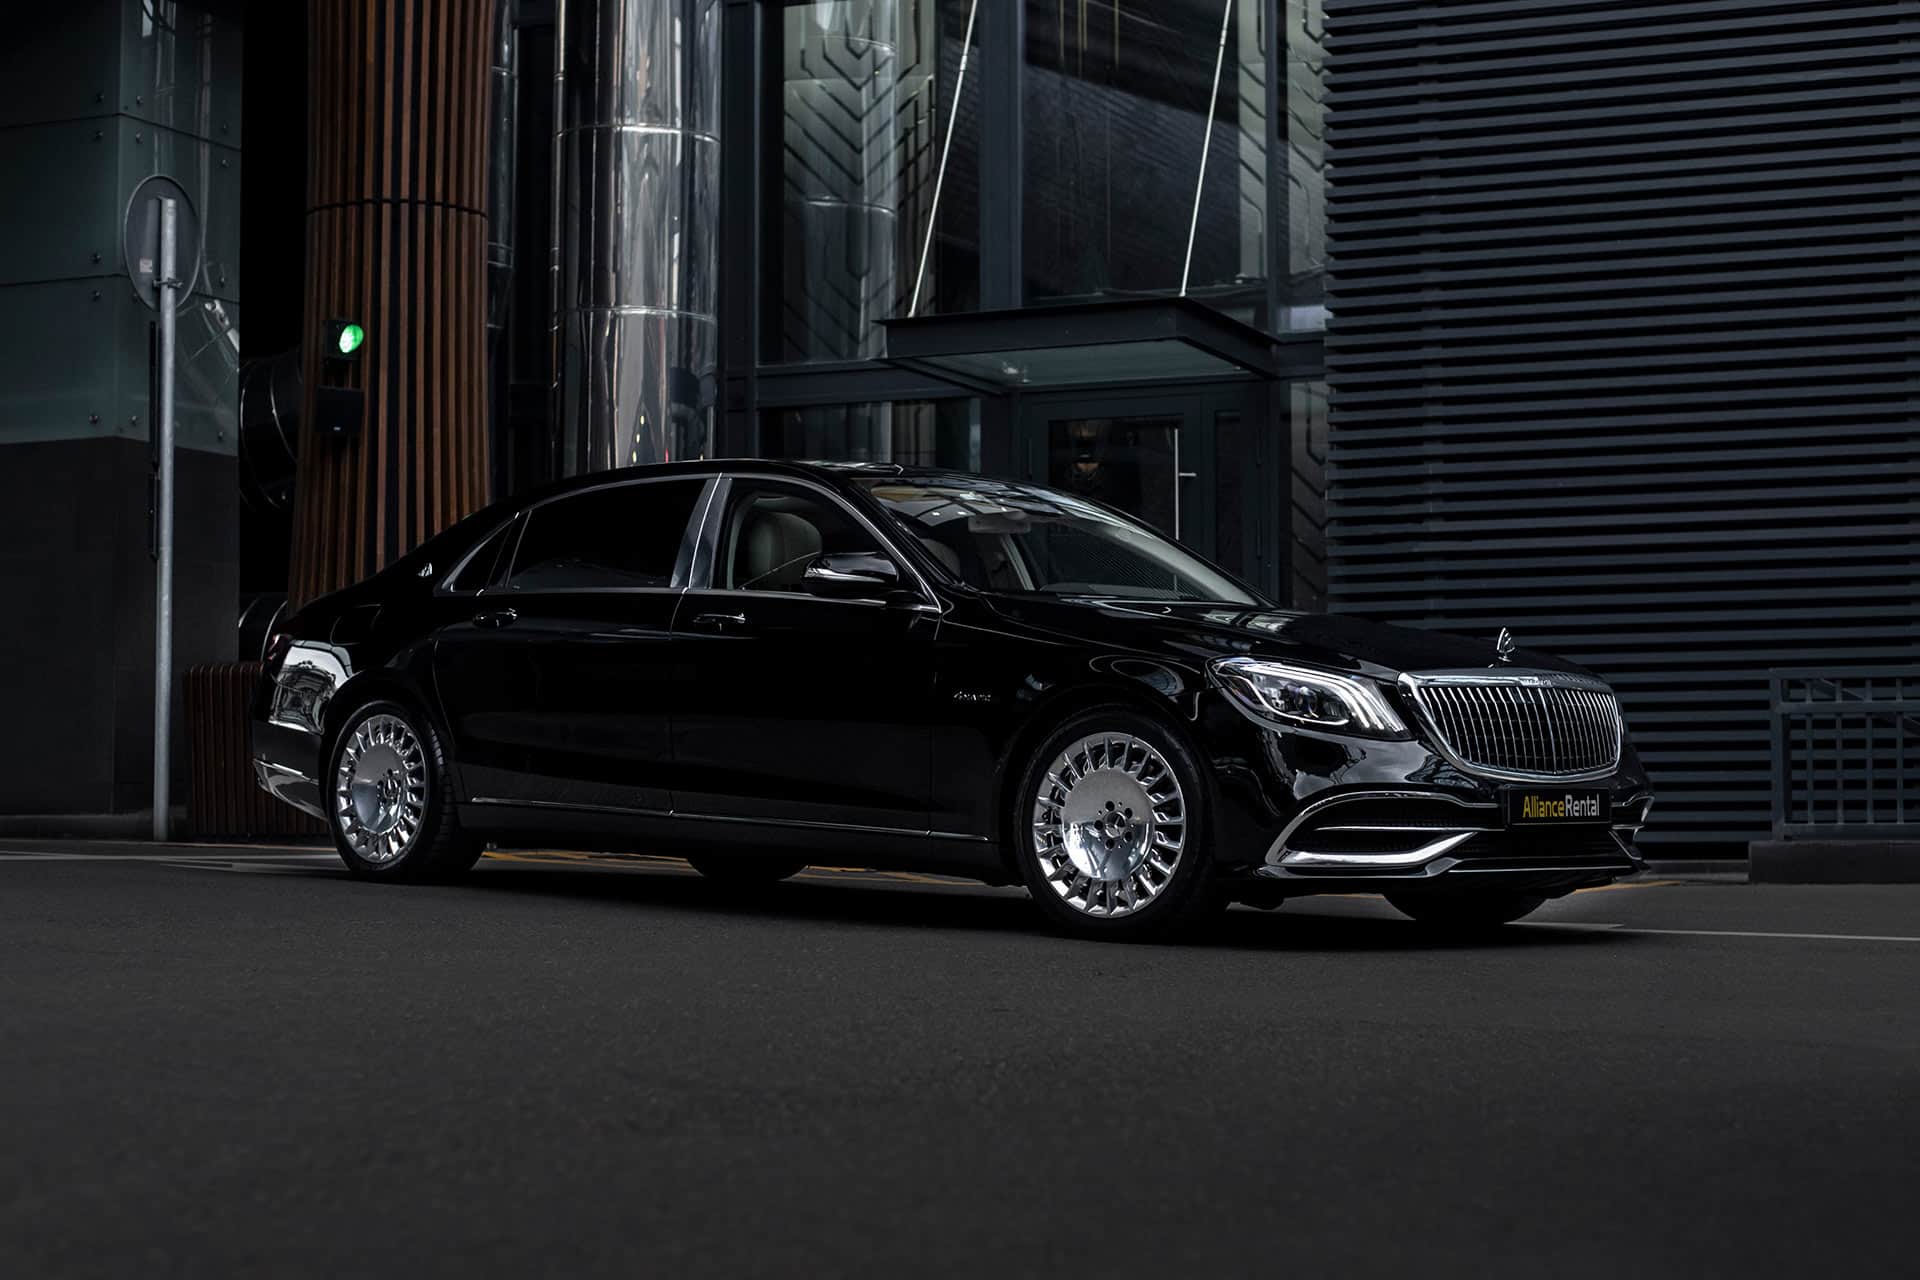 Merсedes Maybach S-class black